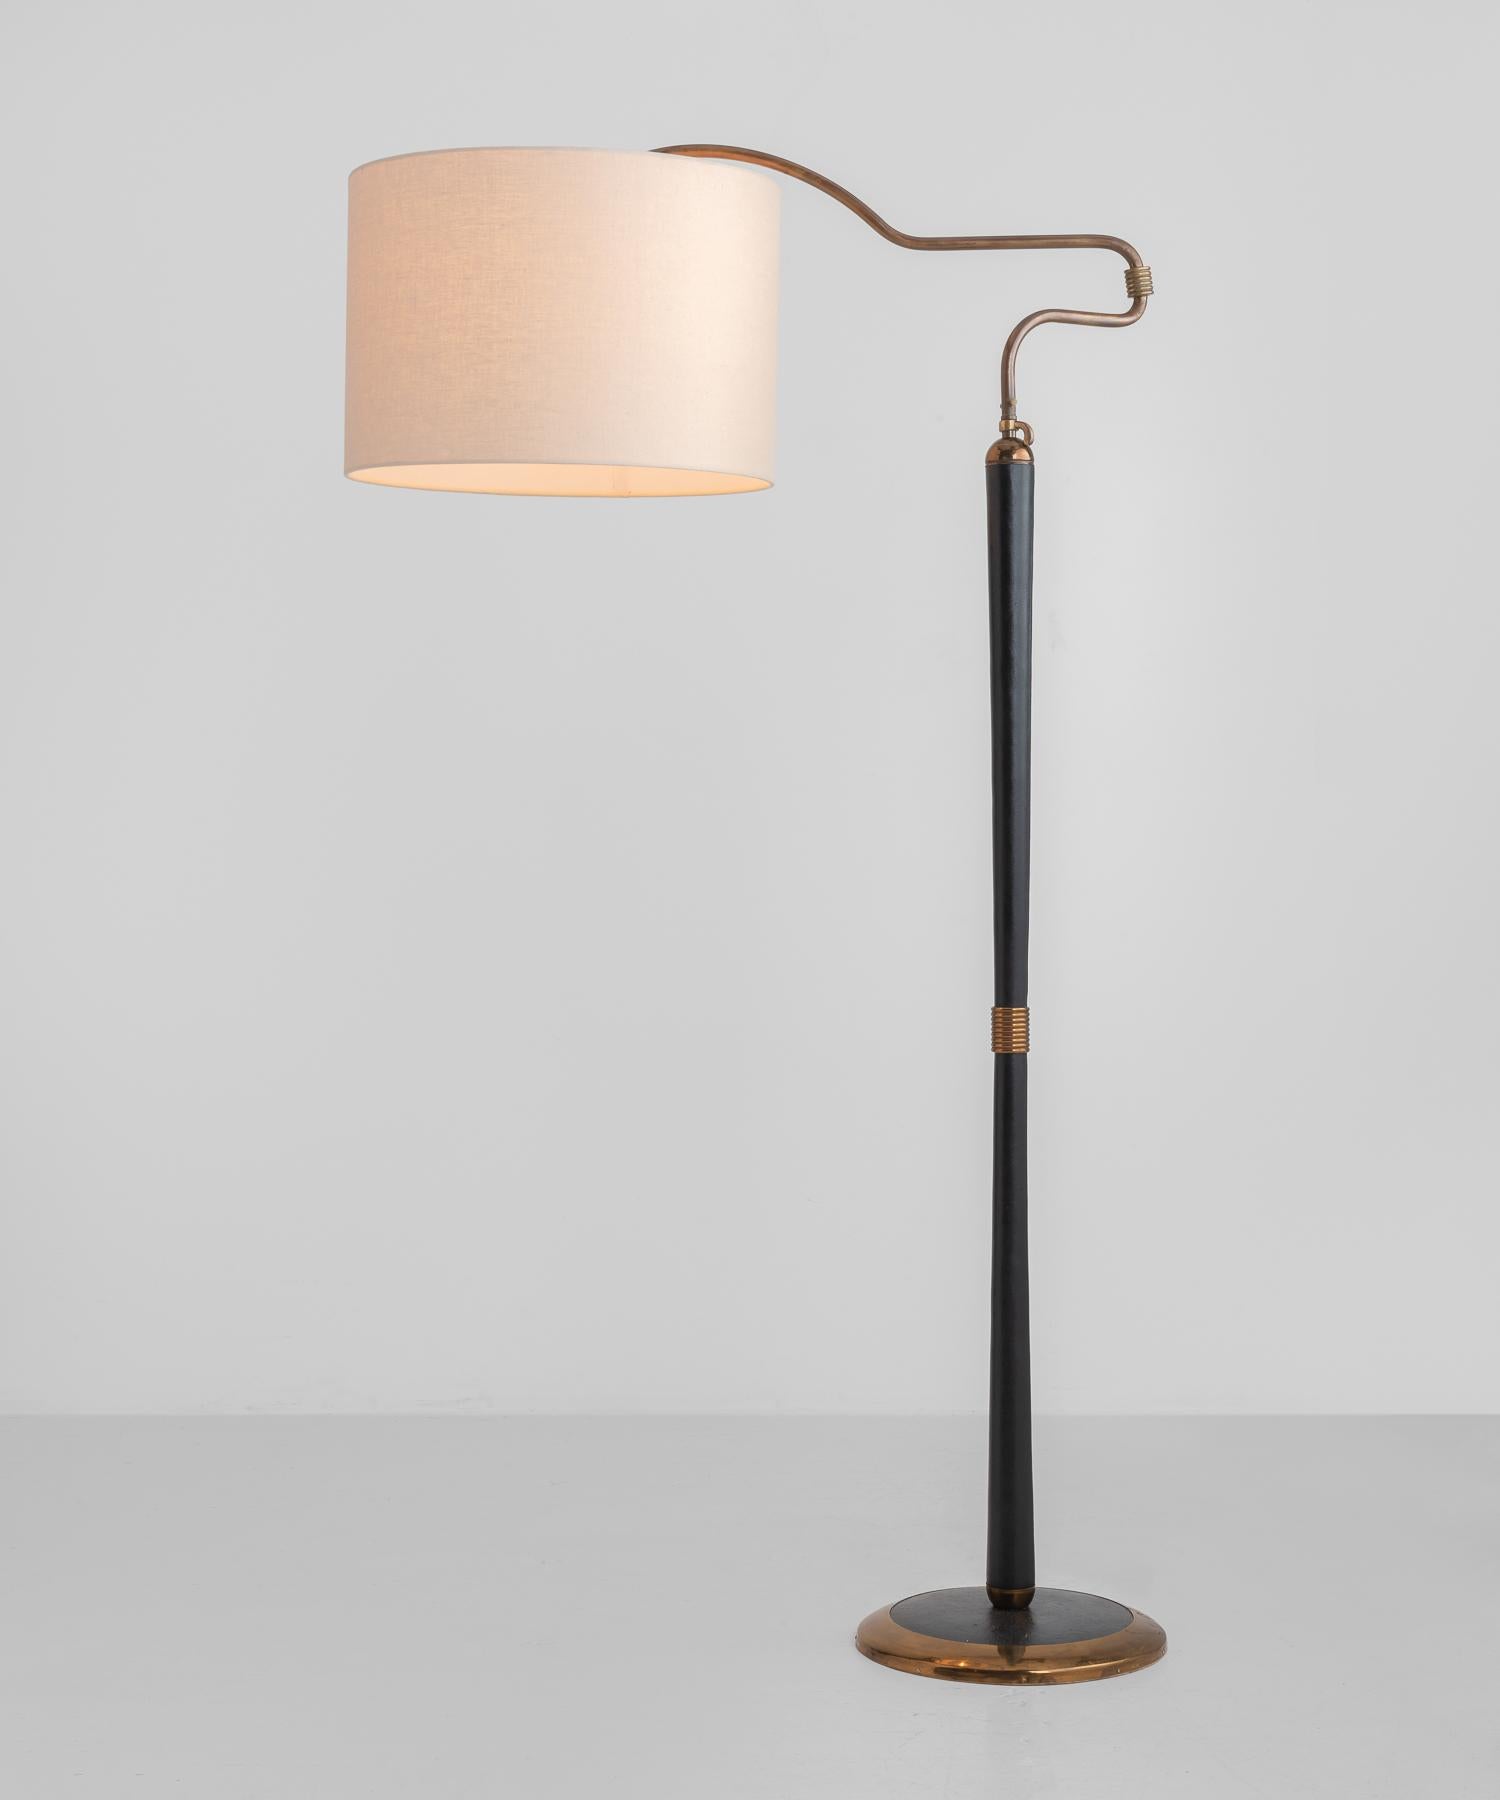 Brass and black leather floor lamp, England, circa 1950.

Articulating brass arm, adjustable in height, with new linen shade.

Measures: 19